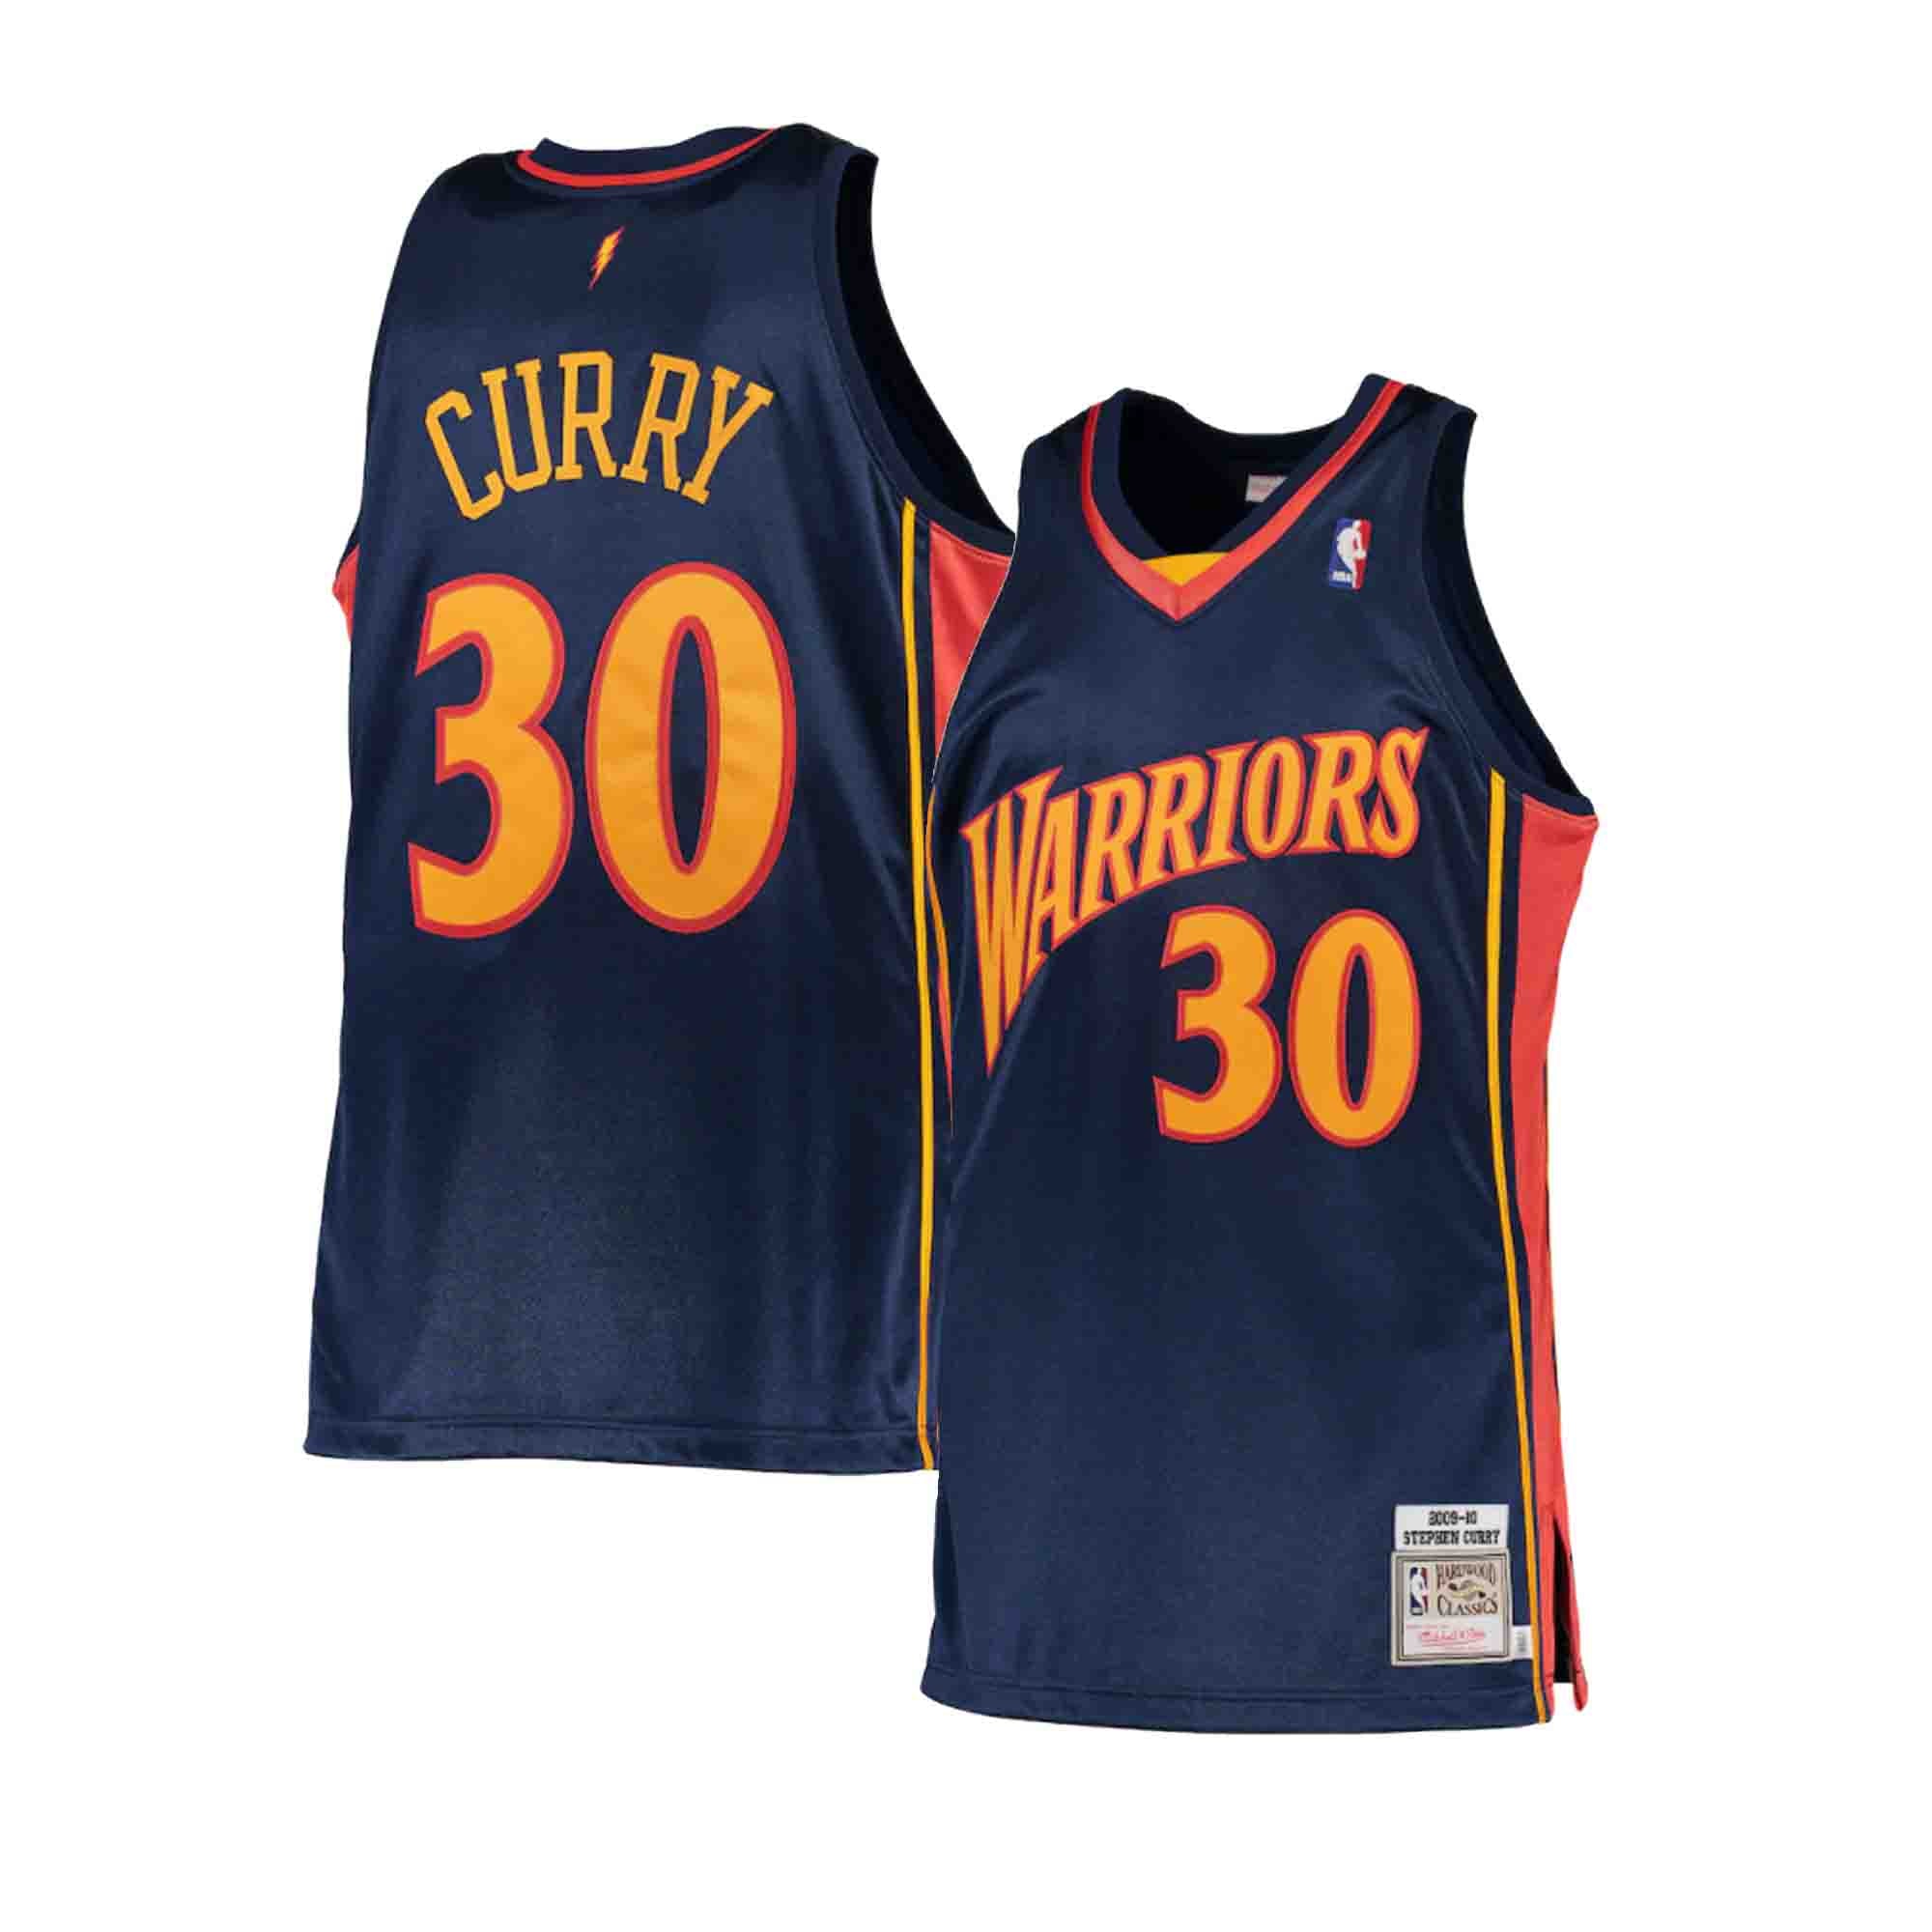  Mitchell & Ness Stephen Curry 2009-10 Authentic Jersey Golden  State Warriors (36 (S)) : Sports & Outdoors